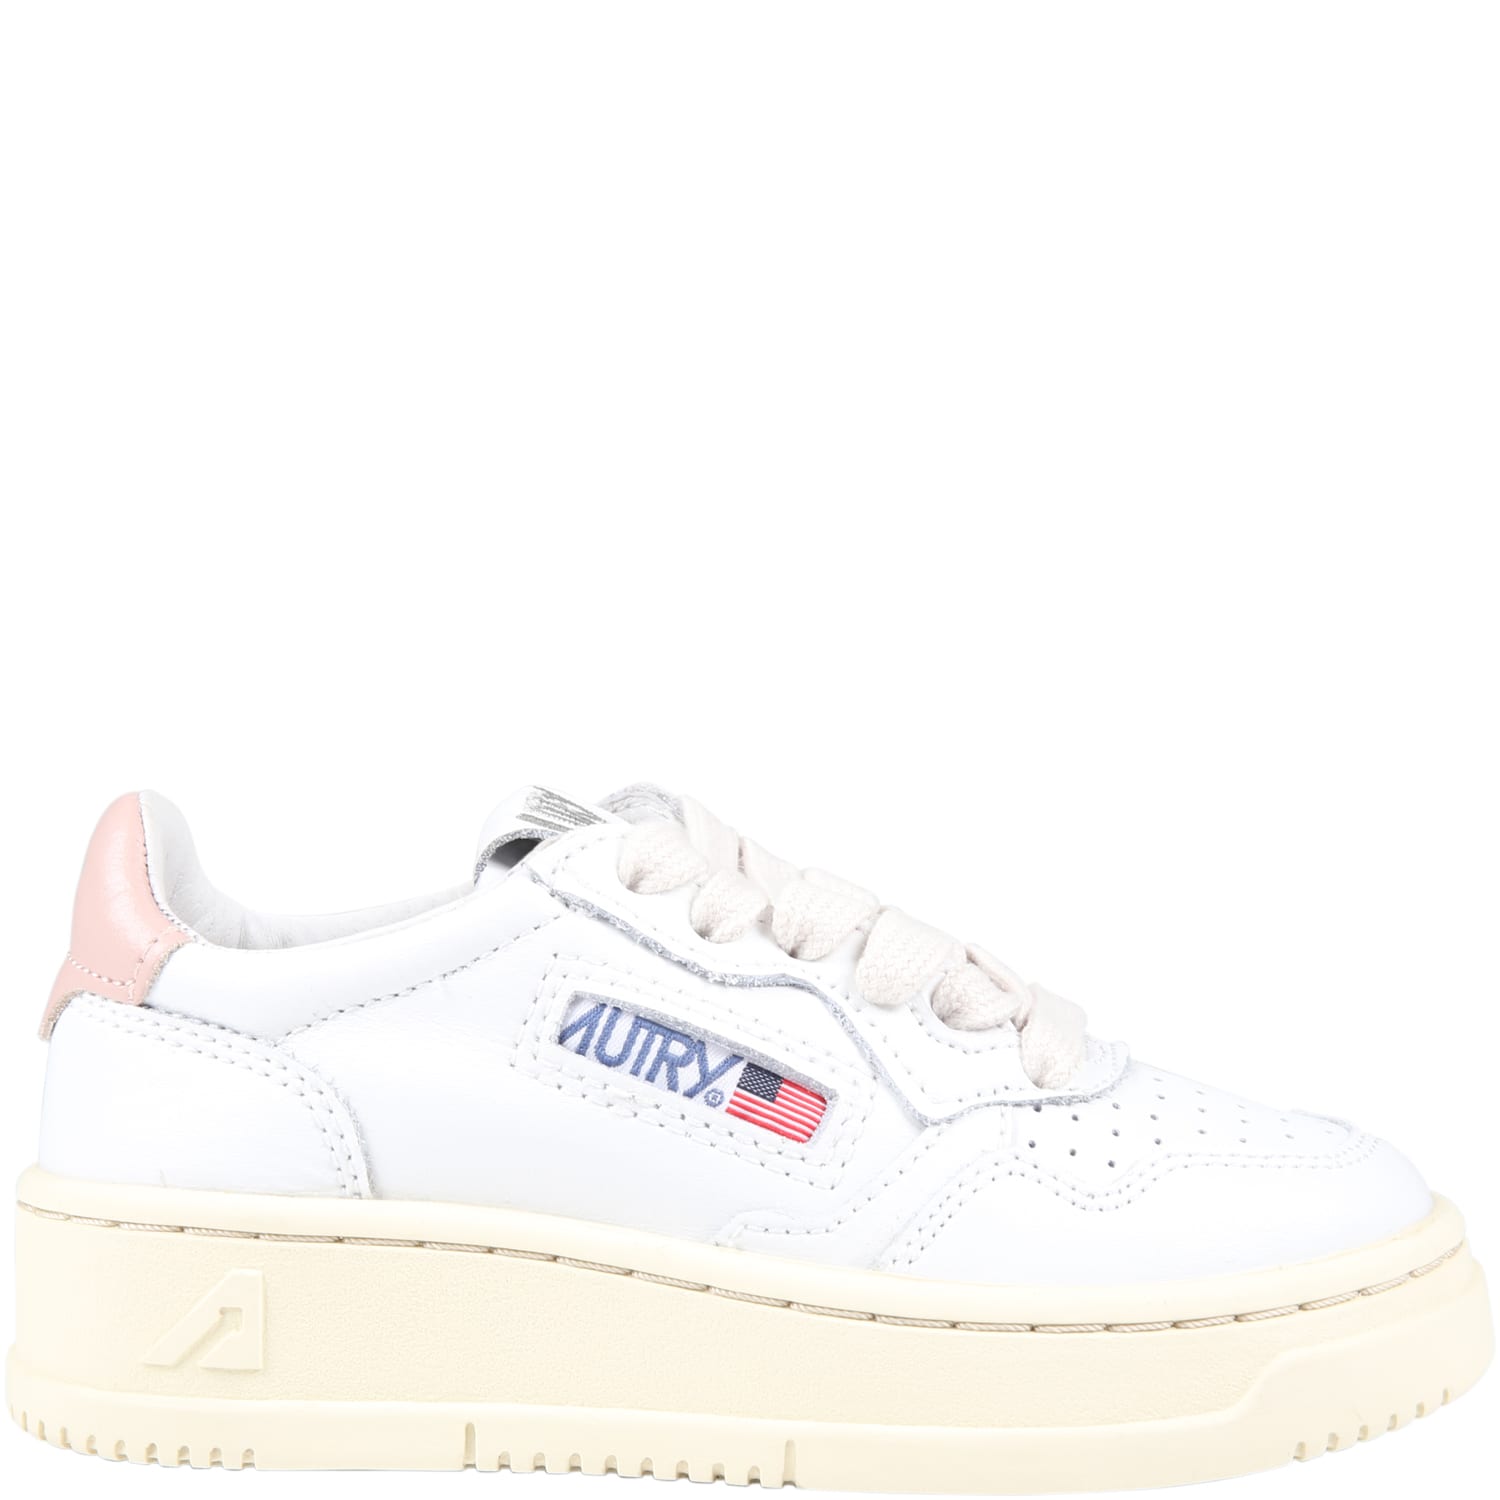 Autry White Sneakers For Kids With Pink Deatils